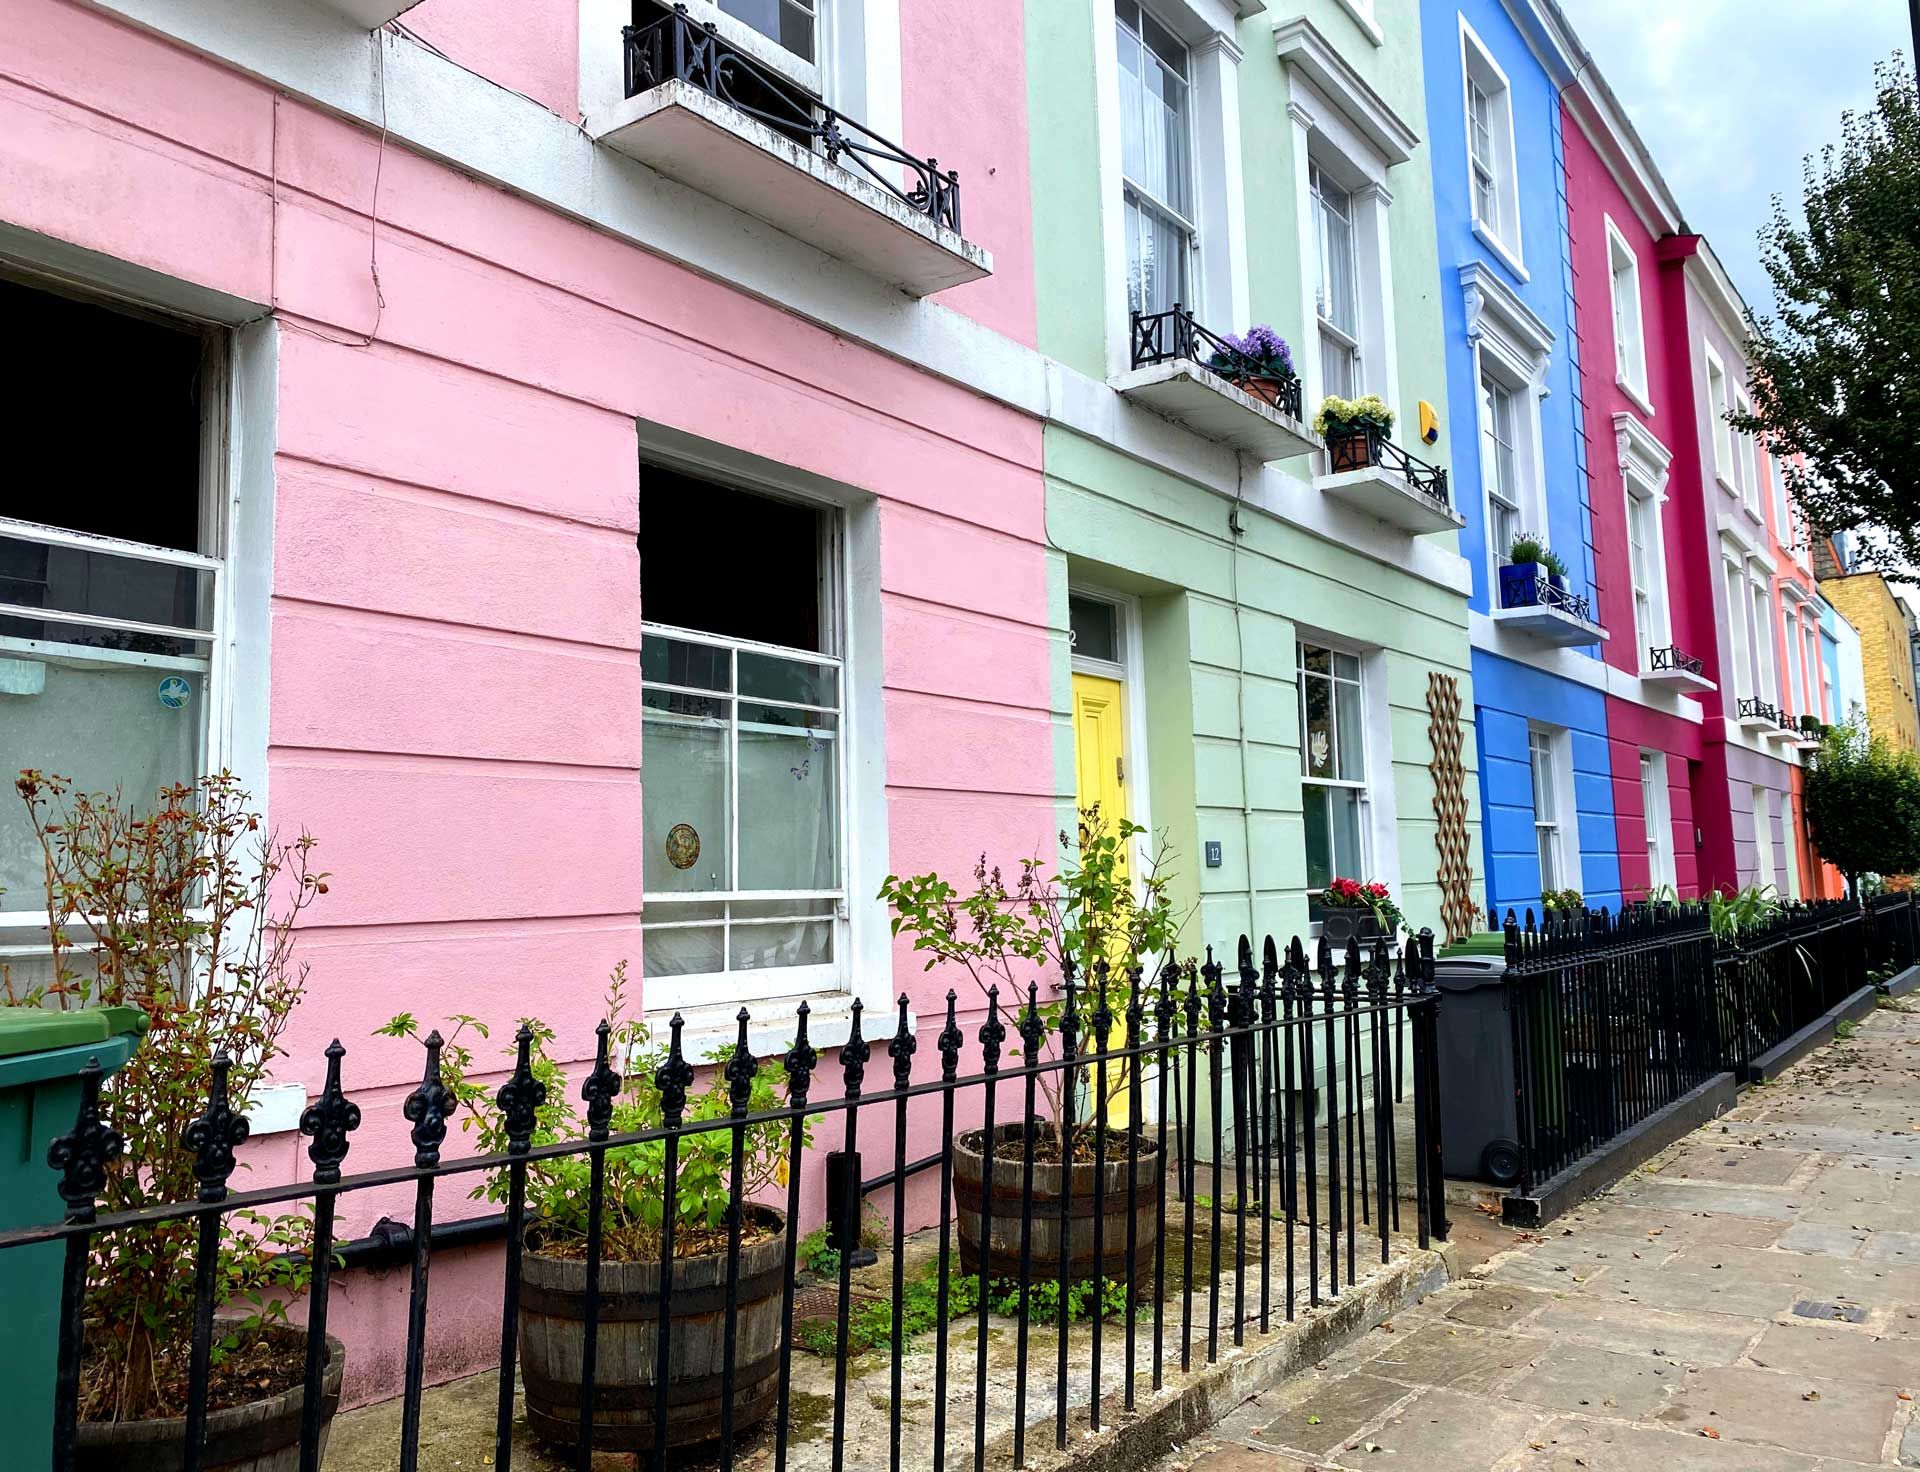 Kentish Town Area Guide